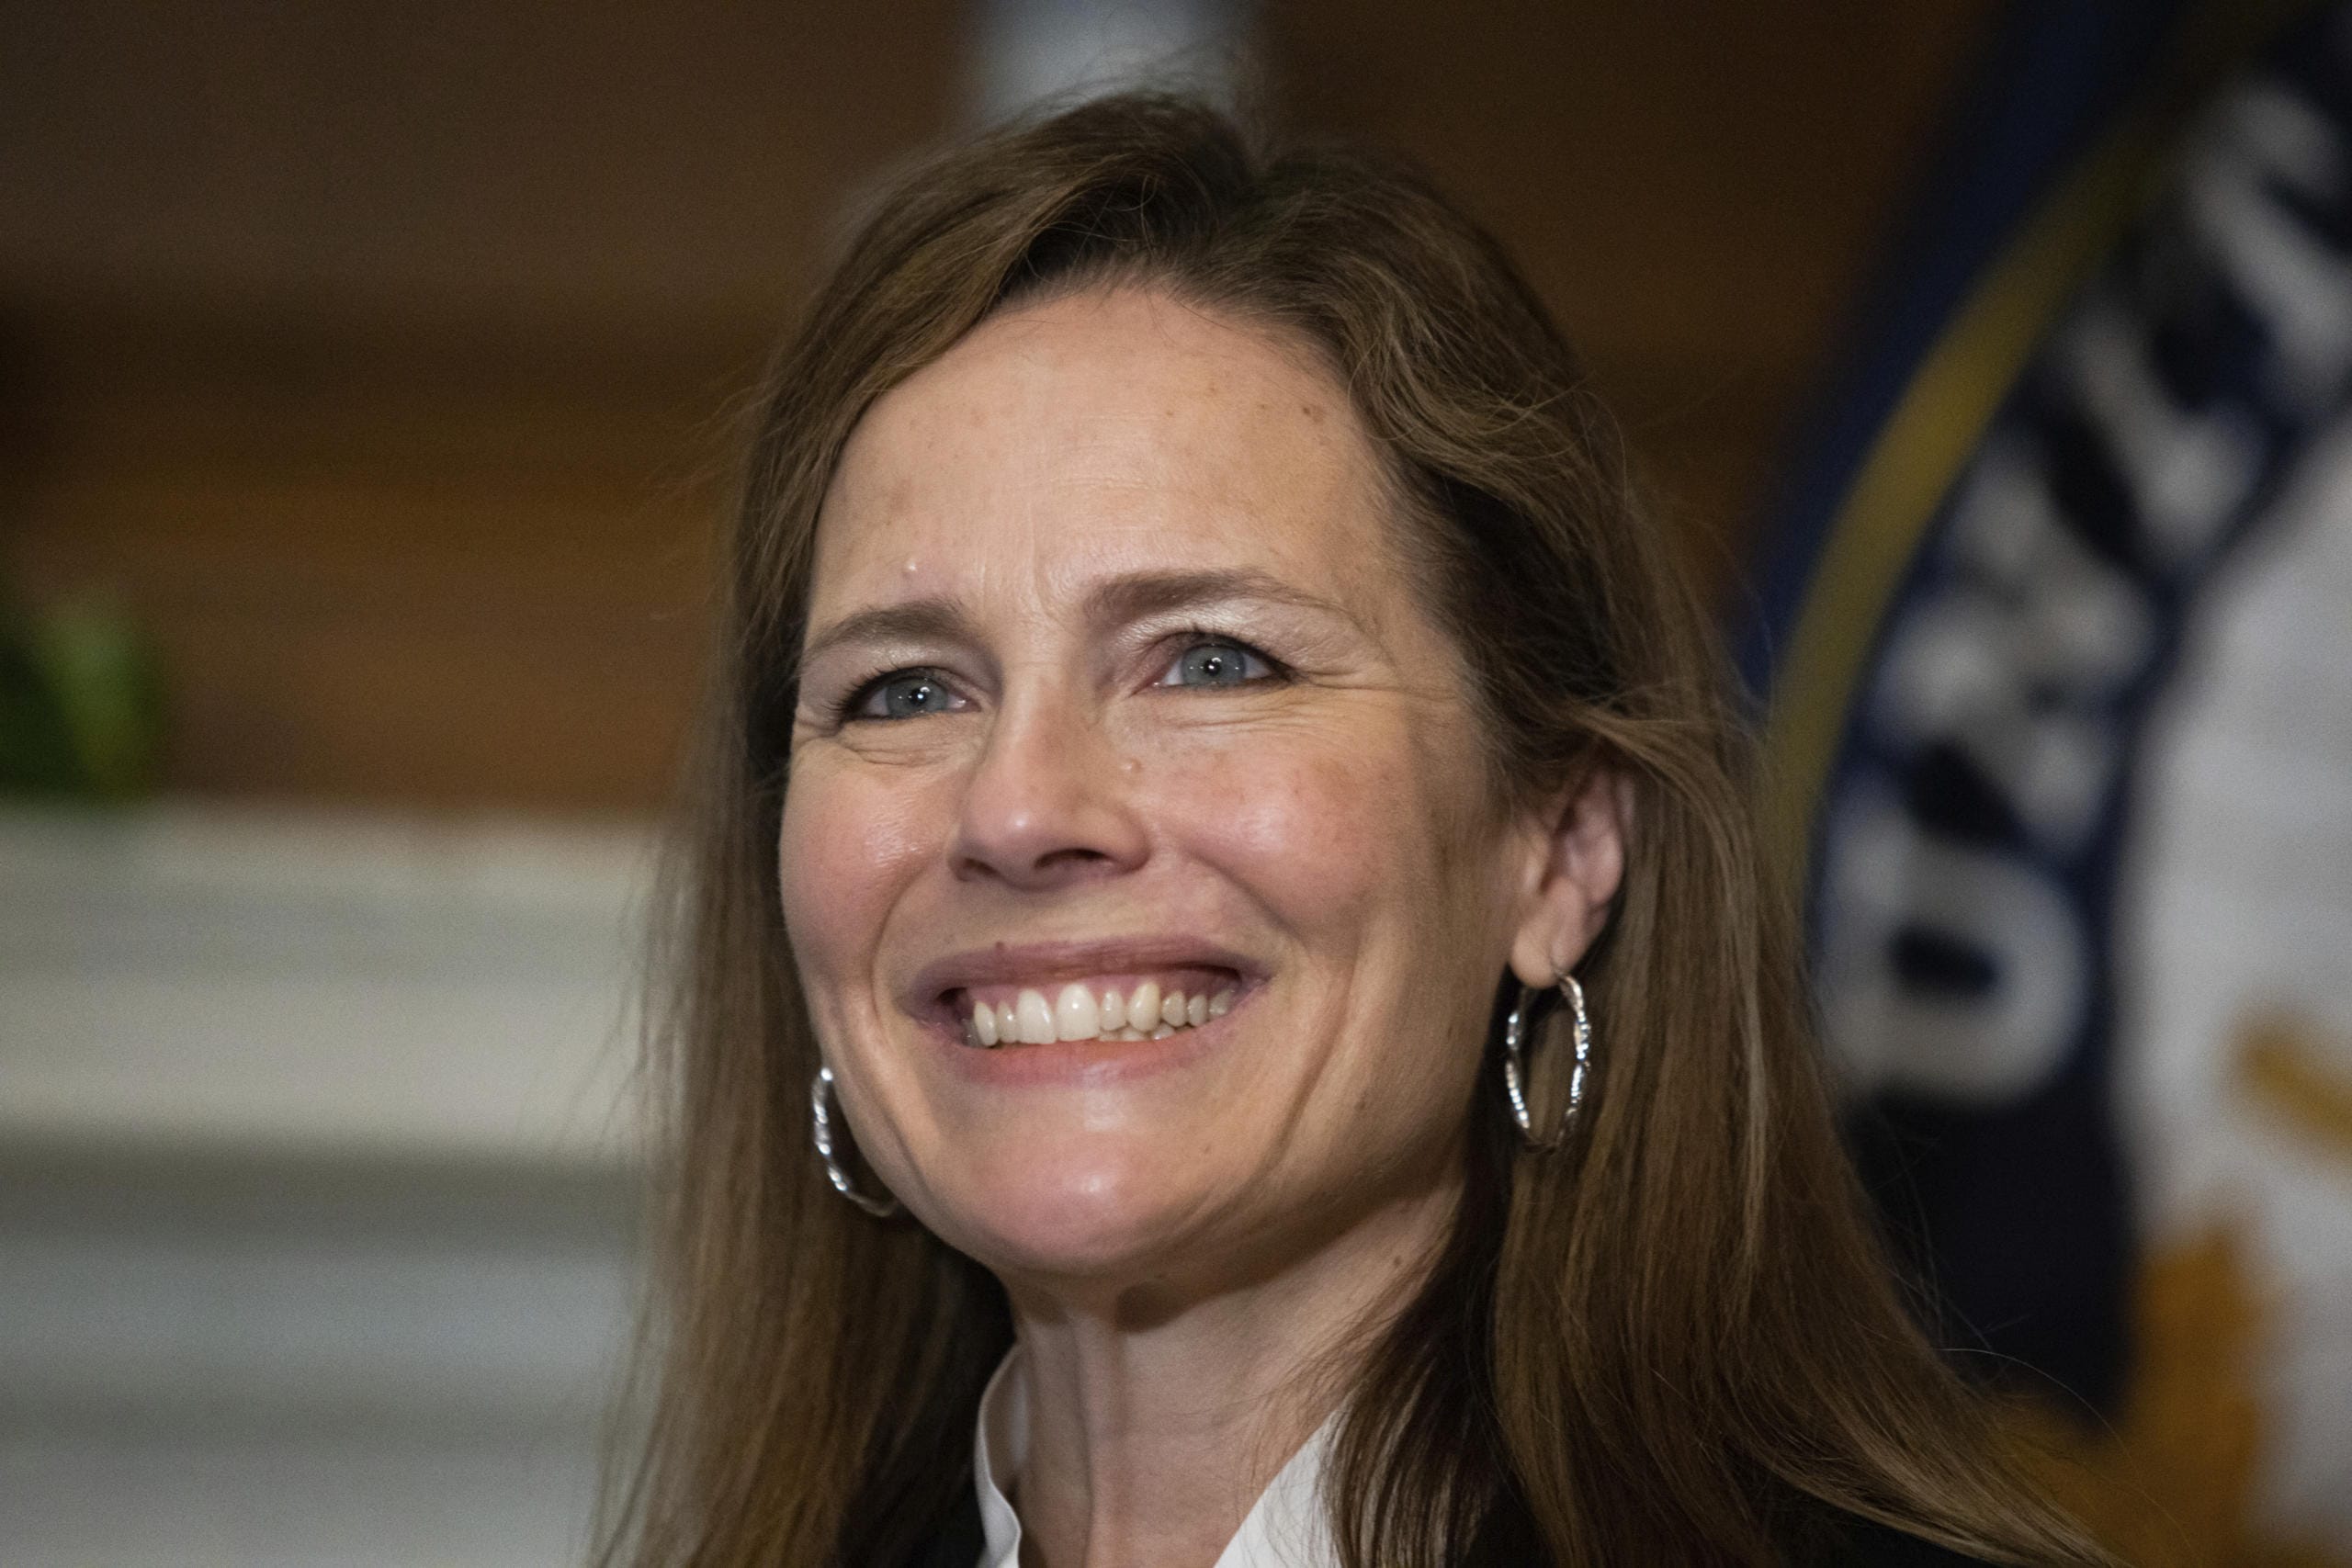 In this Oct. 1, 2020, photo, Supreme Court nominee Judge Amy Coney Barrett, meets with Sen. Roger Wicker, R-Miss., at the Capitol in Washington. Confirmation hearings begin Monday for President Donald Trump’s Supreme Court nominee, Amy Coney Barrett. If confirmed, the 48-year-old appeals court judge would fill the seat of liberal Justice Ruth Bader Ginsburg, who died last month.